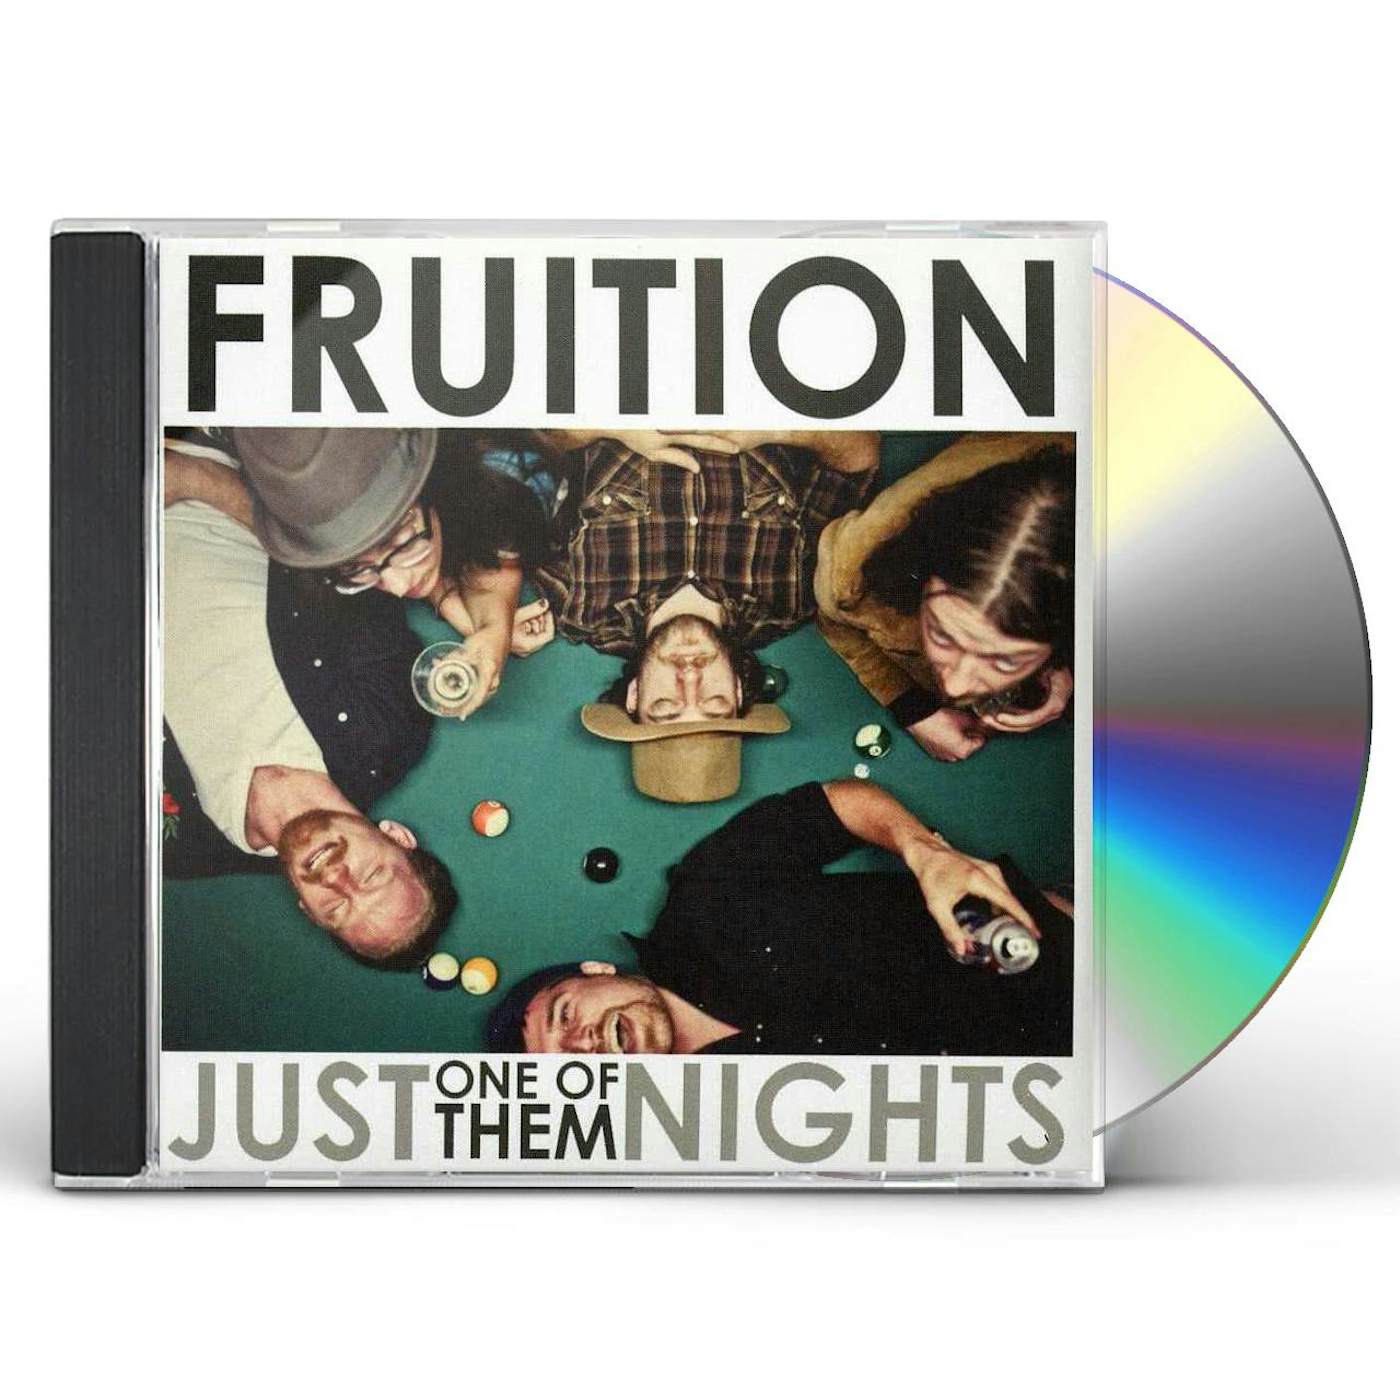 Fruition JUST ONE OF THEM NIGHTS CD